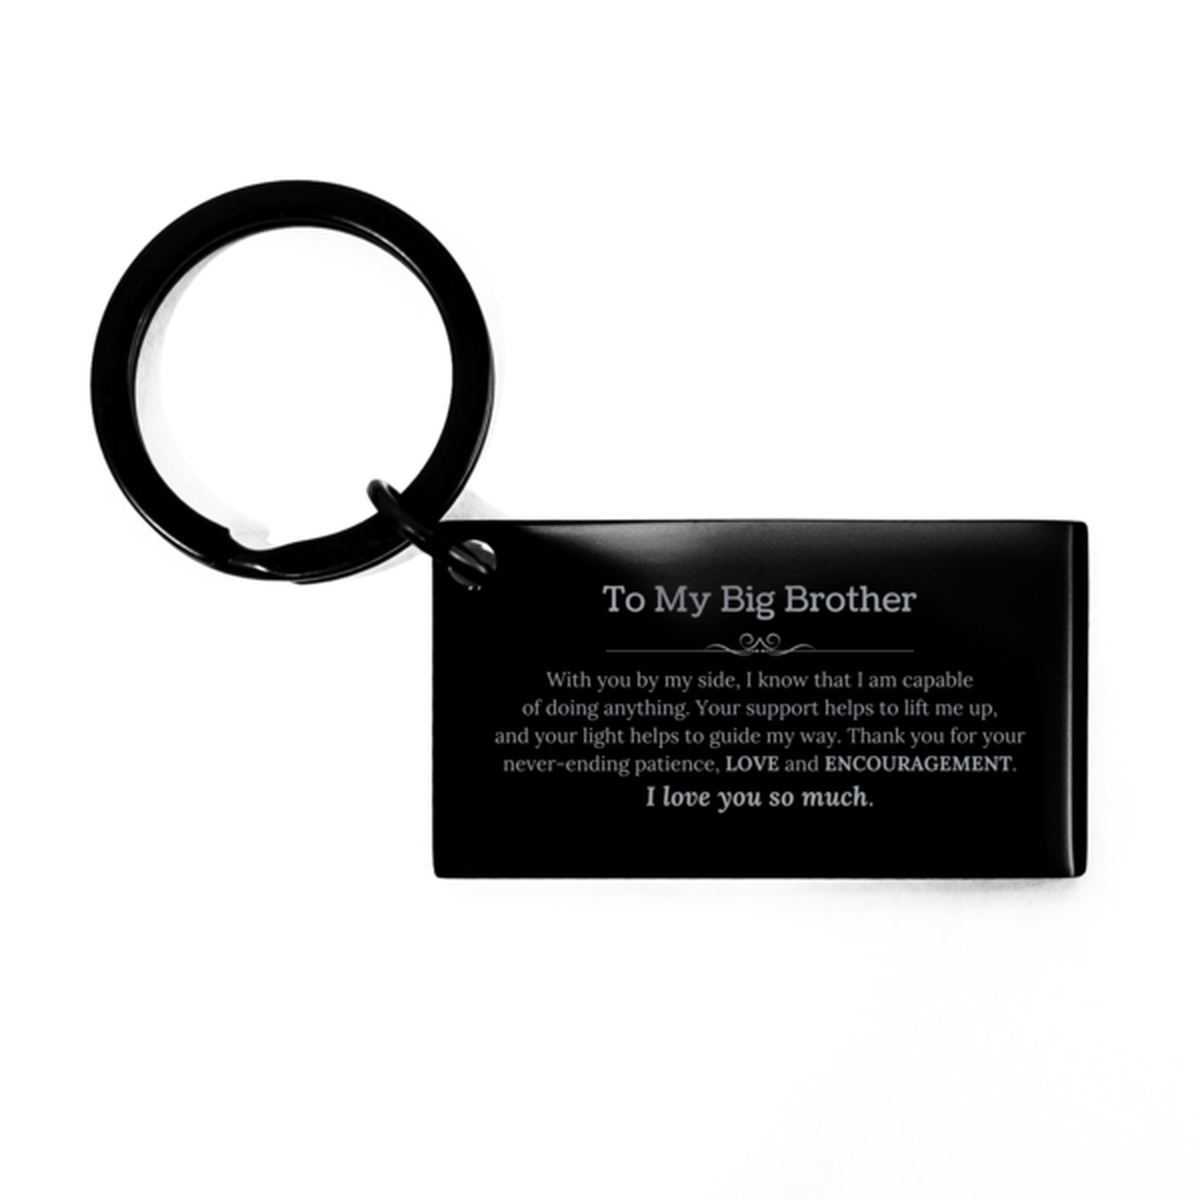 Appreciation Big Brother Keychain Gifts, To My Big Brother Birthday Christmas Wedding Keepsake Gifts for Big Brother With you by my side, I know that I am capable of doing anything. I love you so much